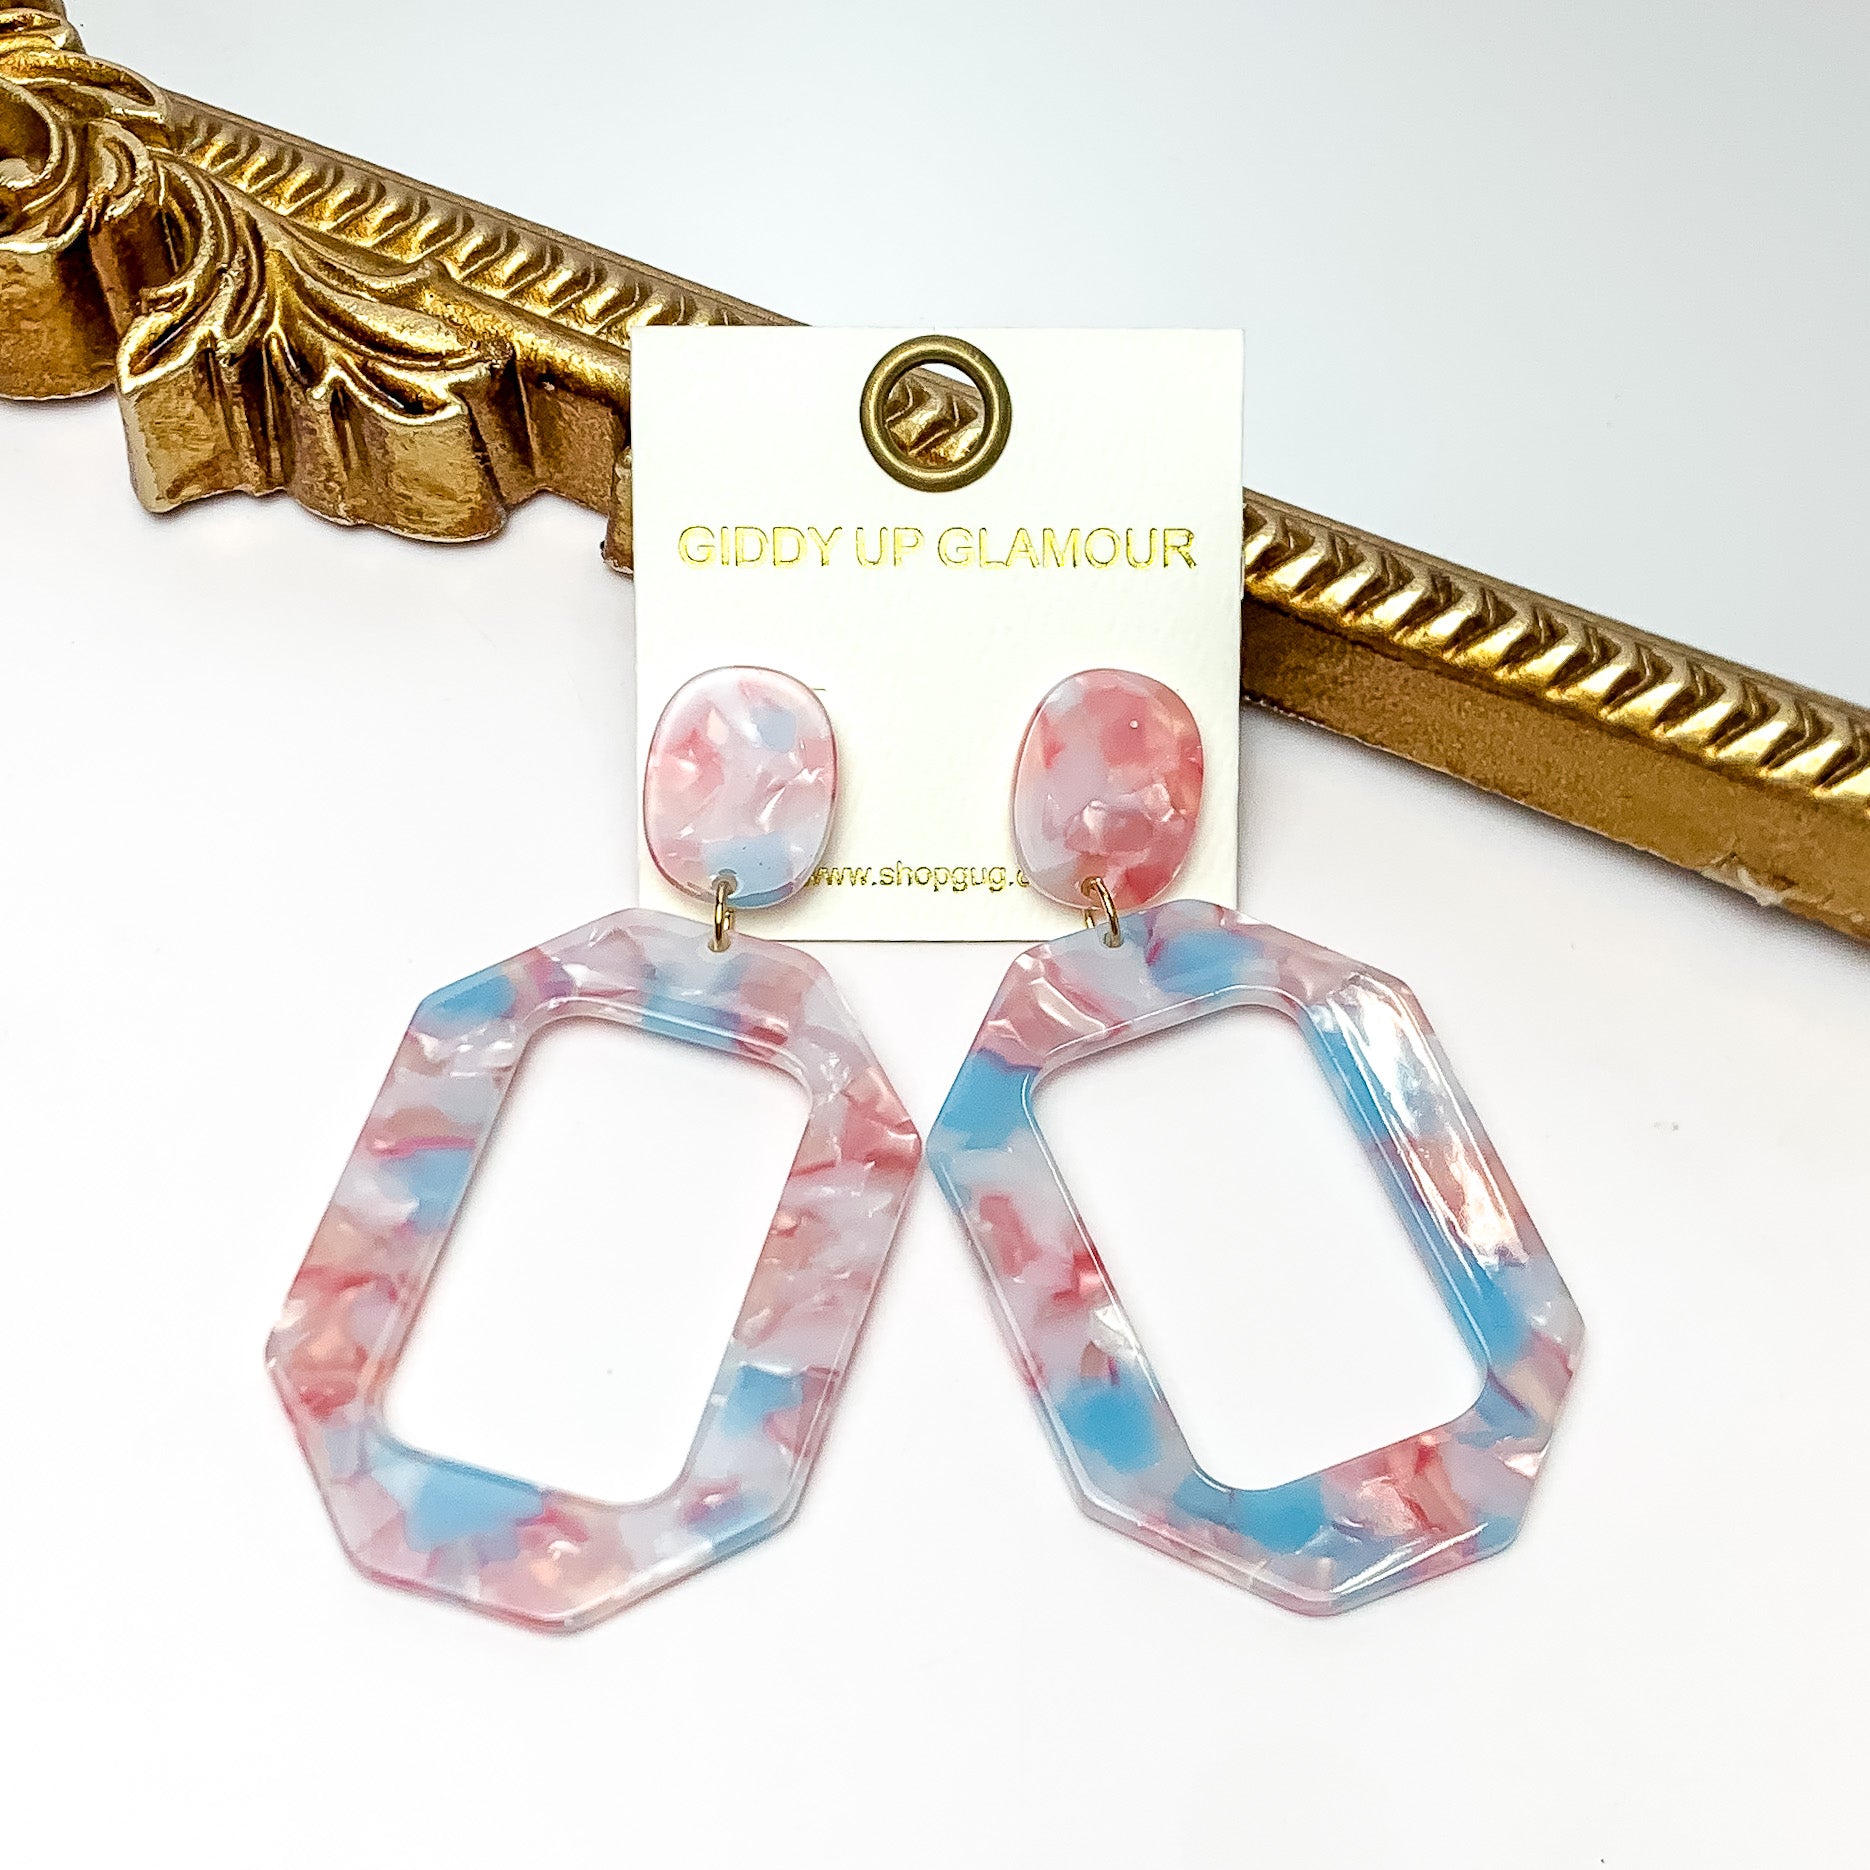 Malibu Marble Open Rectangle Earrings in Pink and Blue. Pictured on a white background with the earrings laying on a gold frame.